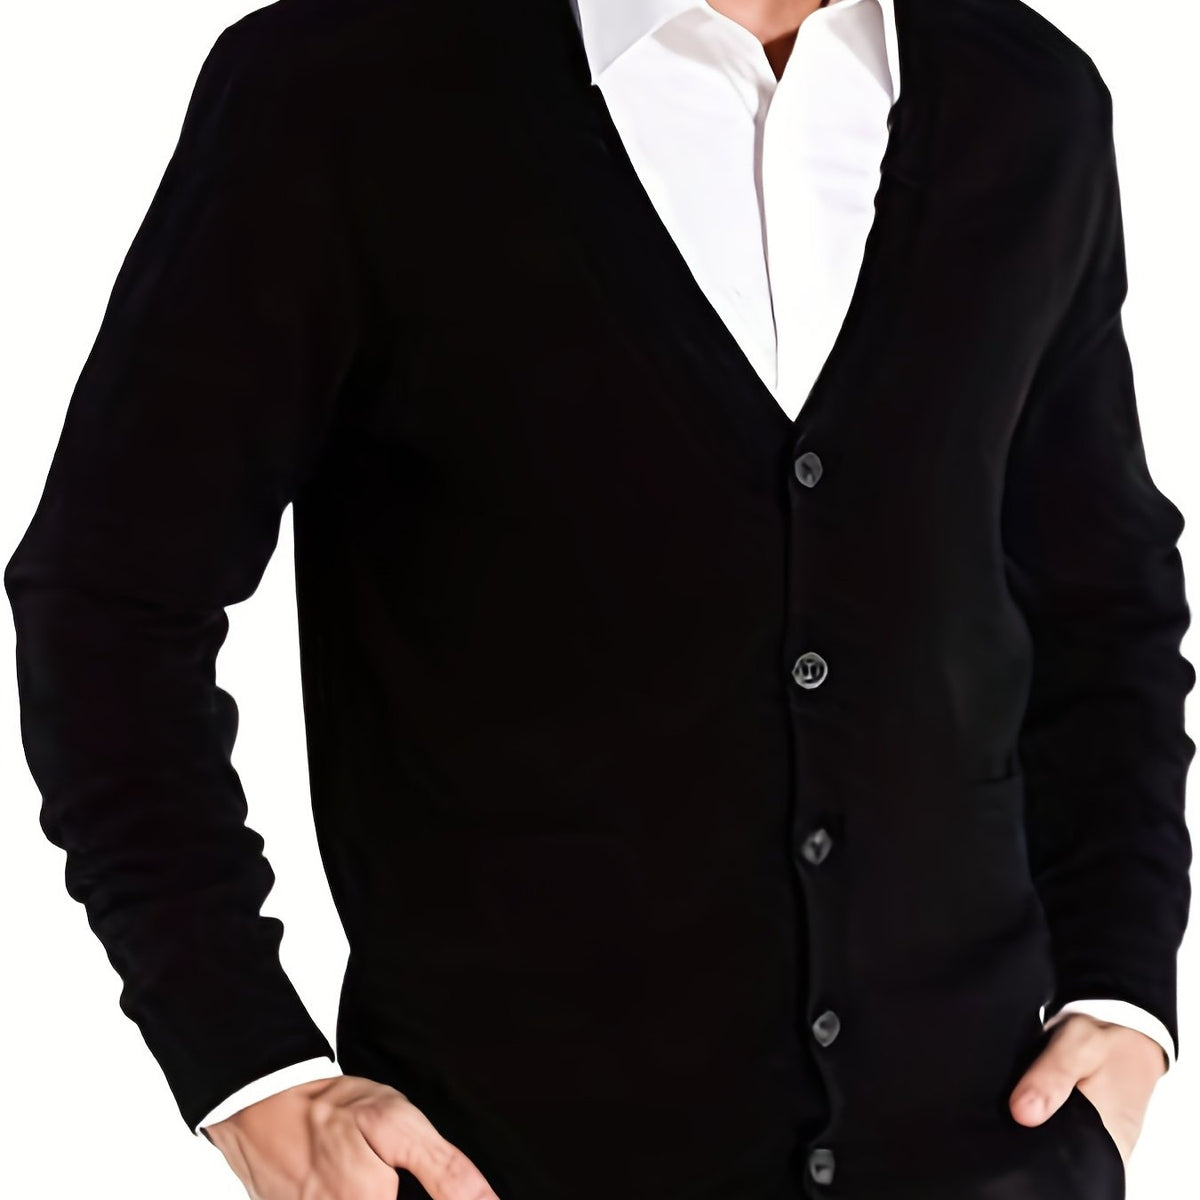 Men's Work V-neck Long Sleeves Button Cardigan Sweaters